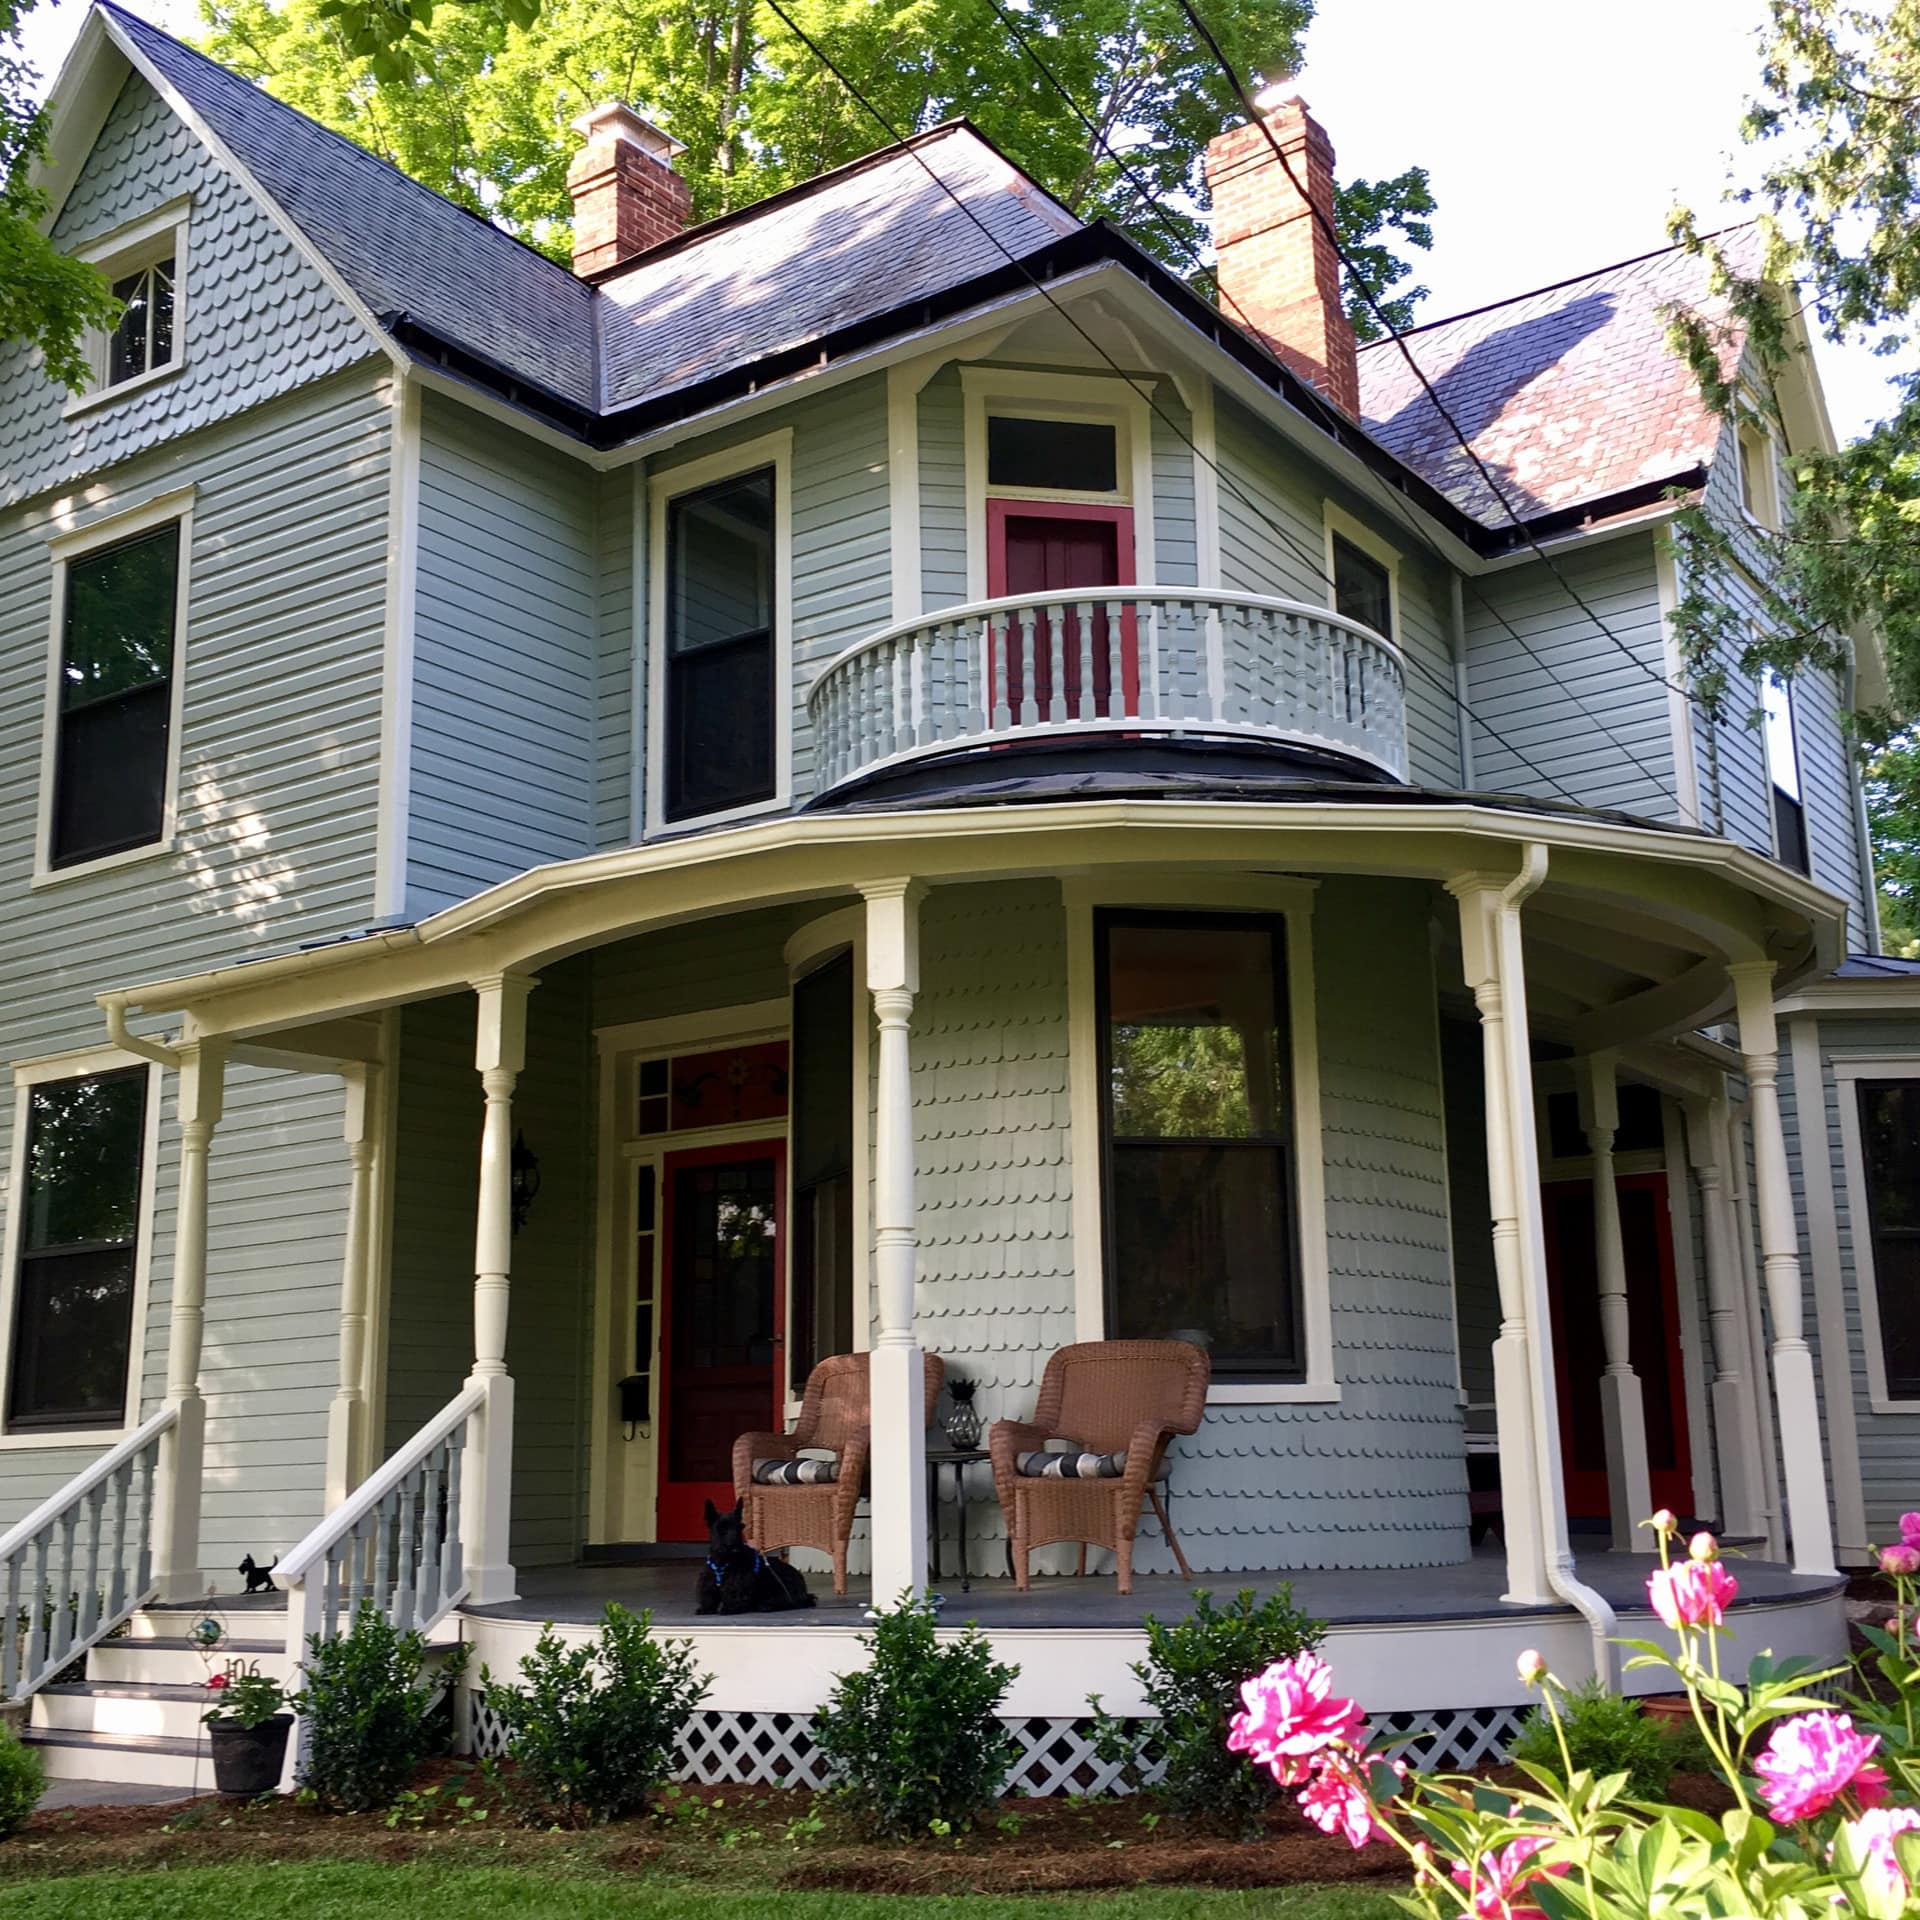 A Victorian-style home in Virginia has a big porch and a garden that has pink flowers